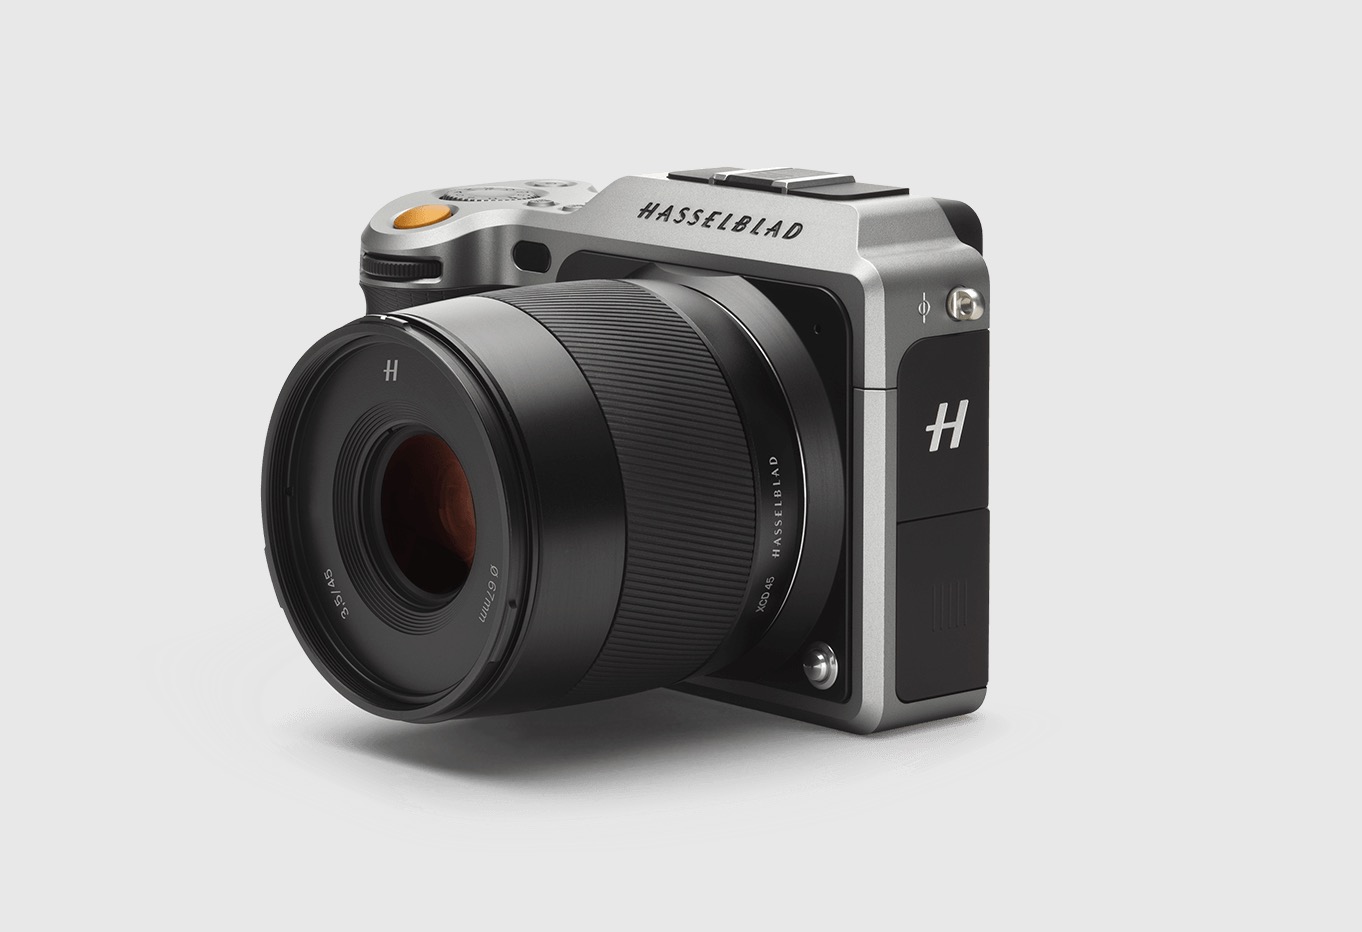 Hasselblad X1D: Everything you need to know about this unique mirrorless camera